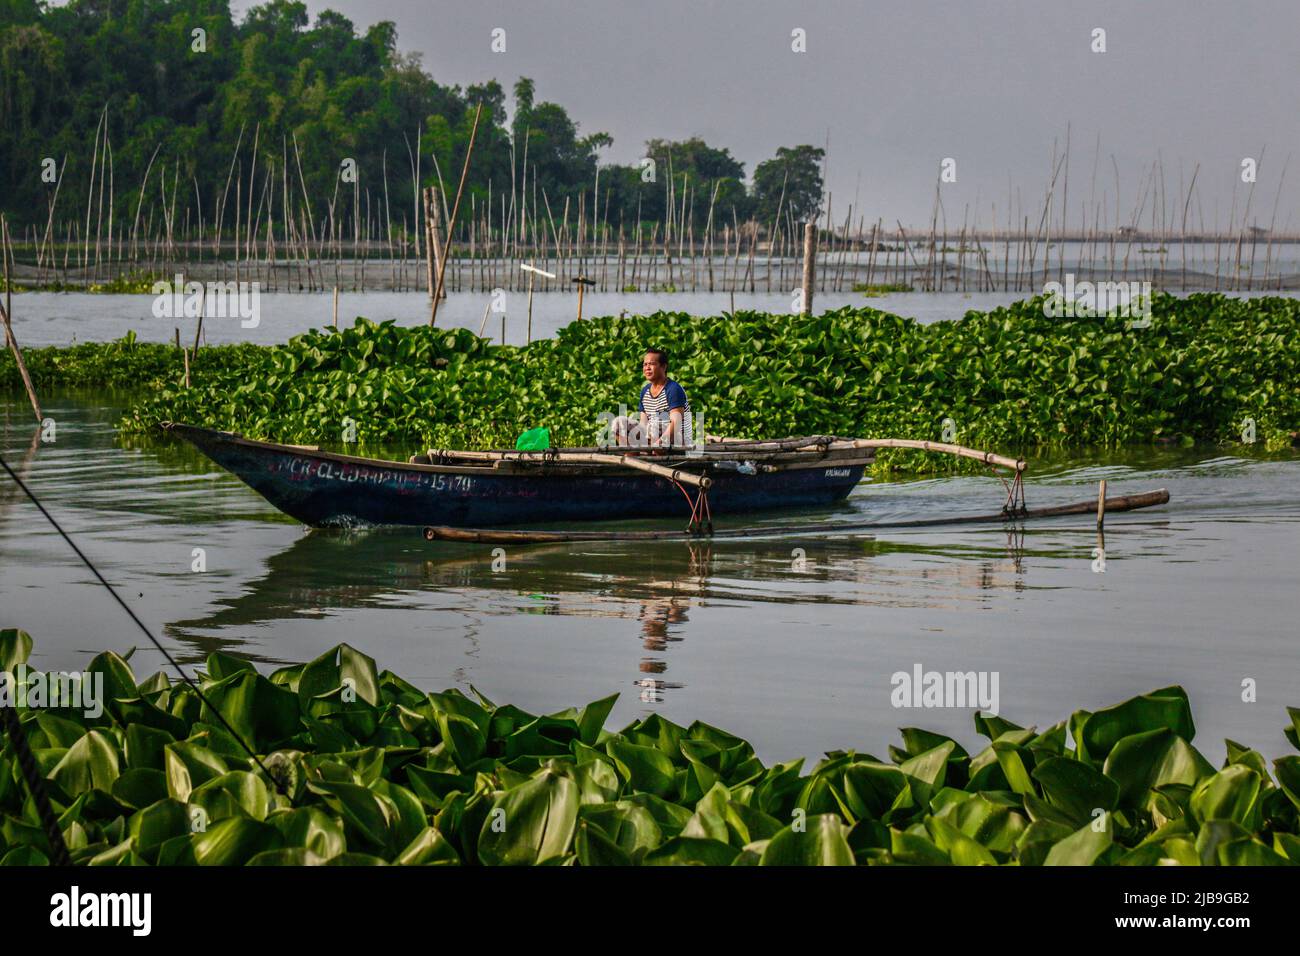 A fisherman rows his small boat between floating water hyacinths. Laguna Lake is the largest lake in the Philippines, covering a surface of 900 square kilometers or equivalent to 90,000 hectares. Its water runs from Laguna Province all the way to the Province of Rizal, the southern part of Luzon. The lake provides resources like transportation, recreation, livelihood, and most importantly food for the surrounding communities. Laguna Lake is classified as Class C freshwater which has the capability to grow fish and other aquatic resources. Some watershed near Metro Manila classified as Class D Stock Photo